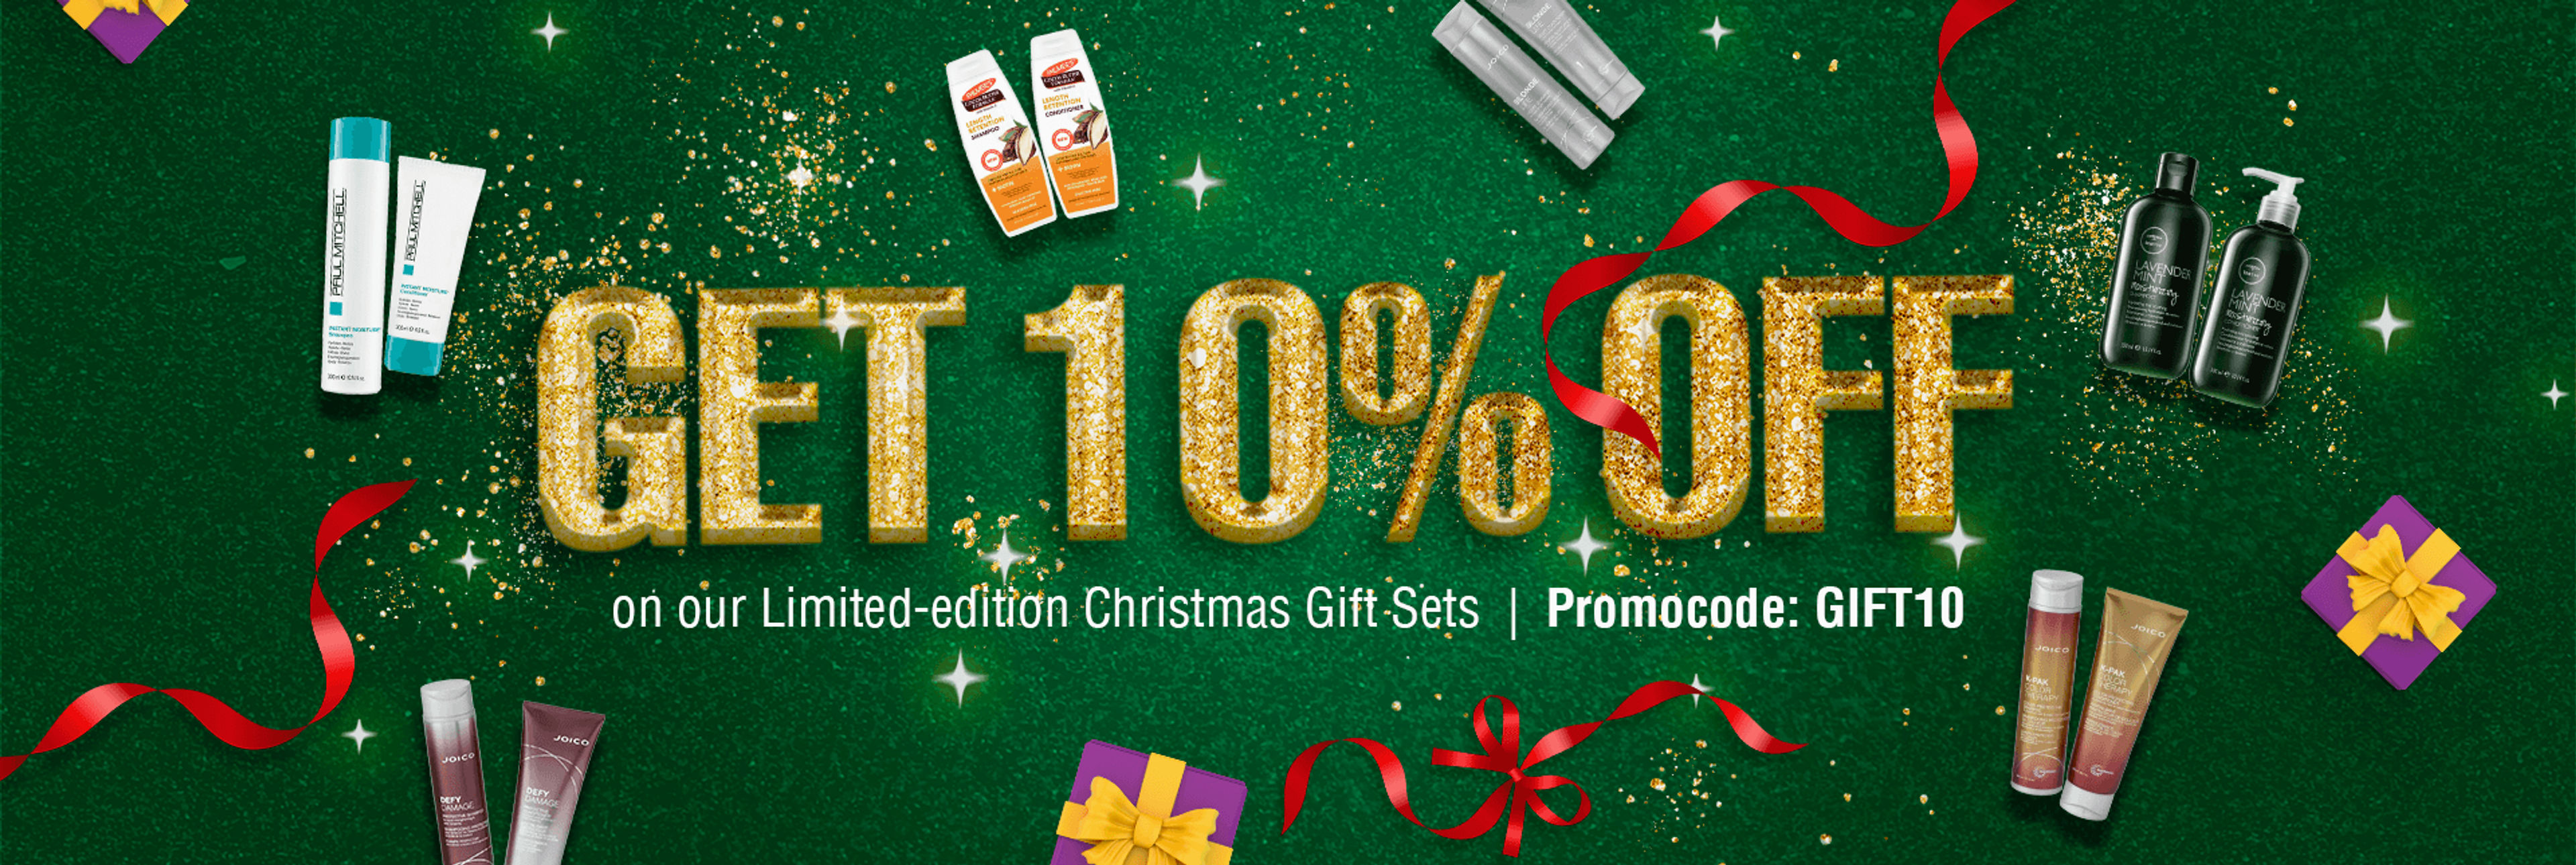         Get 10% off on our Limited-edition Christmas Gift Sets